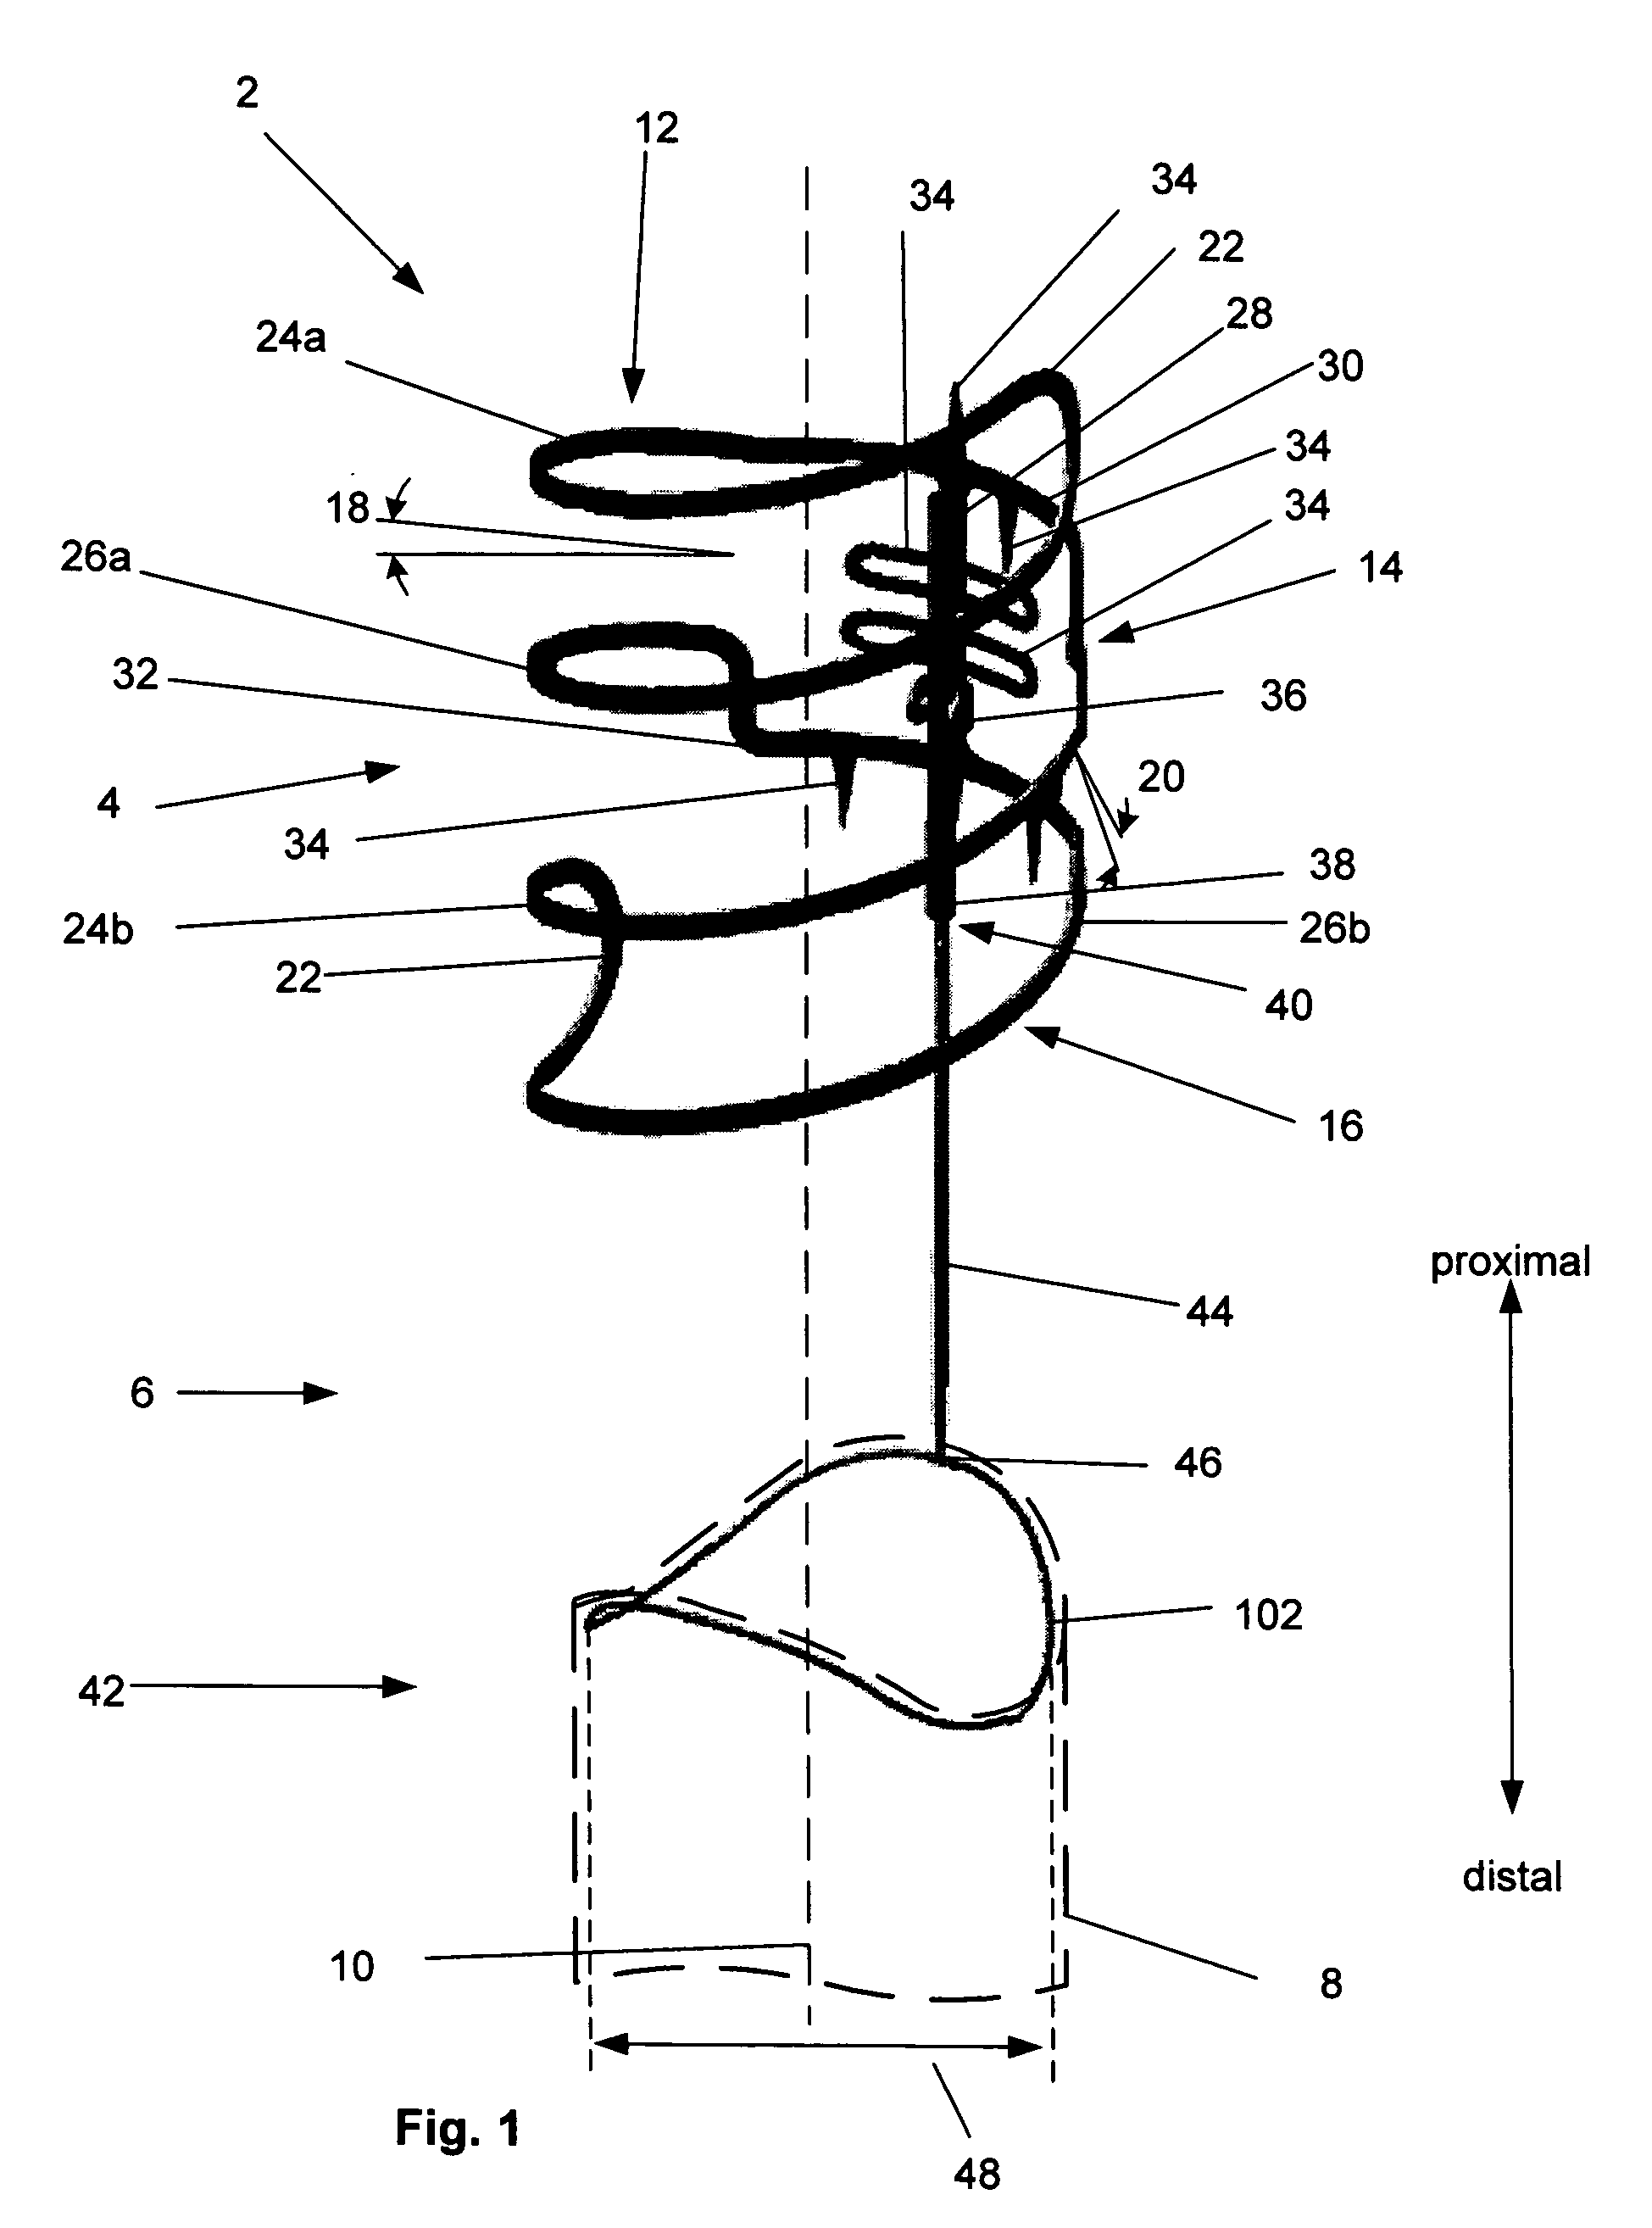 Vascular fixation device and method